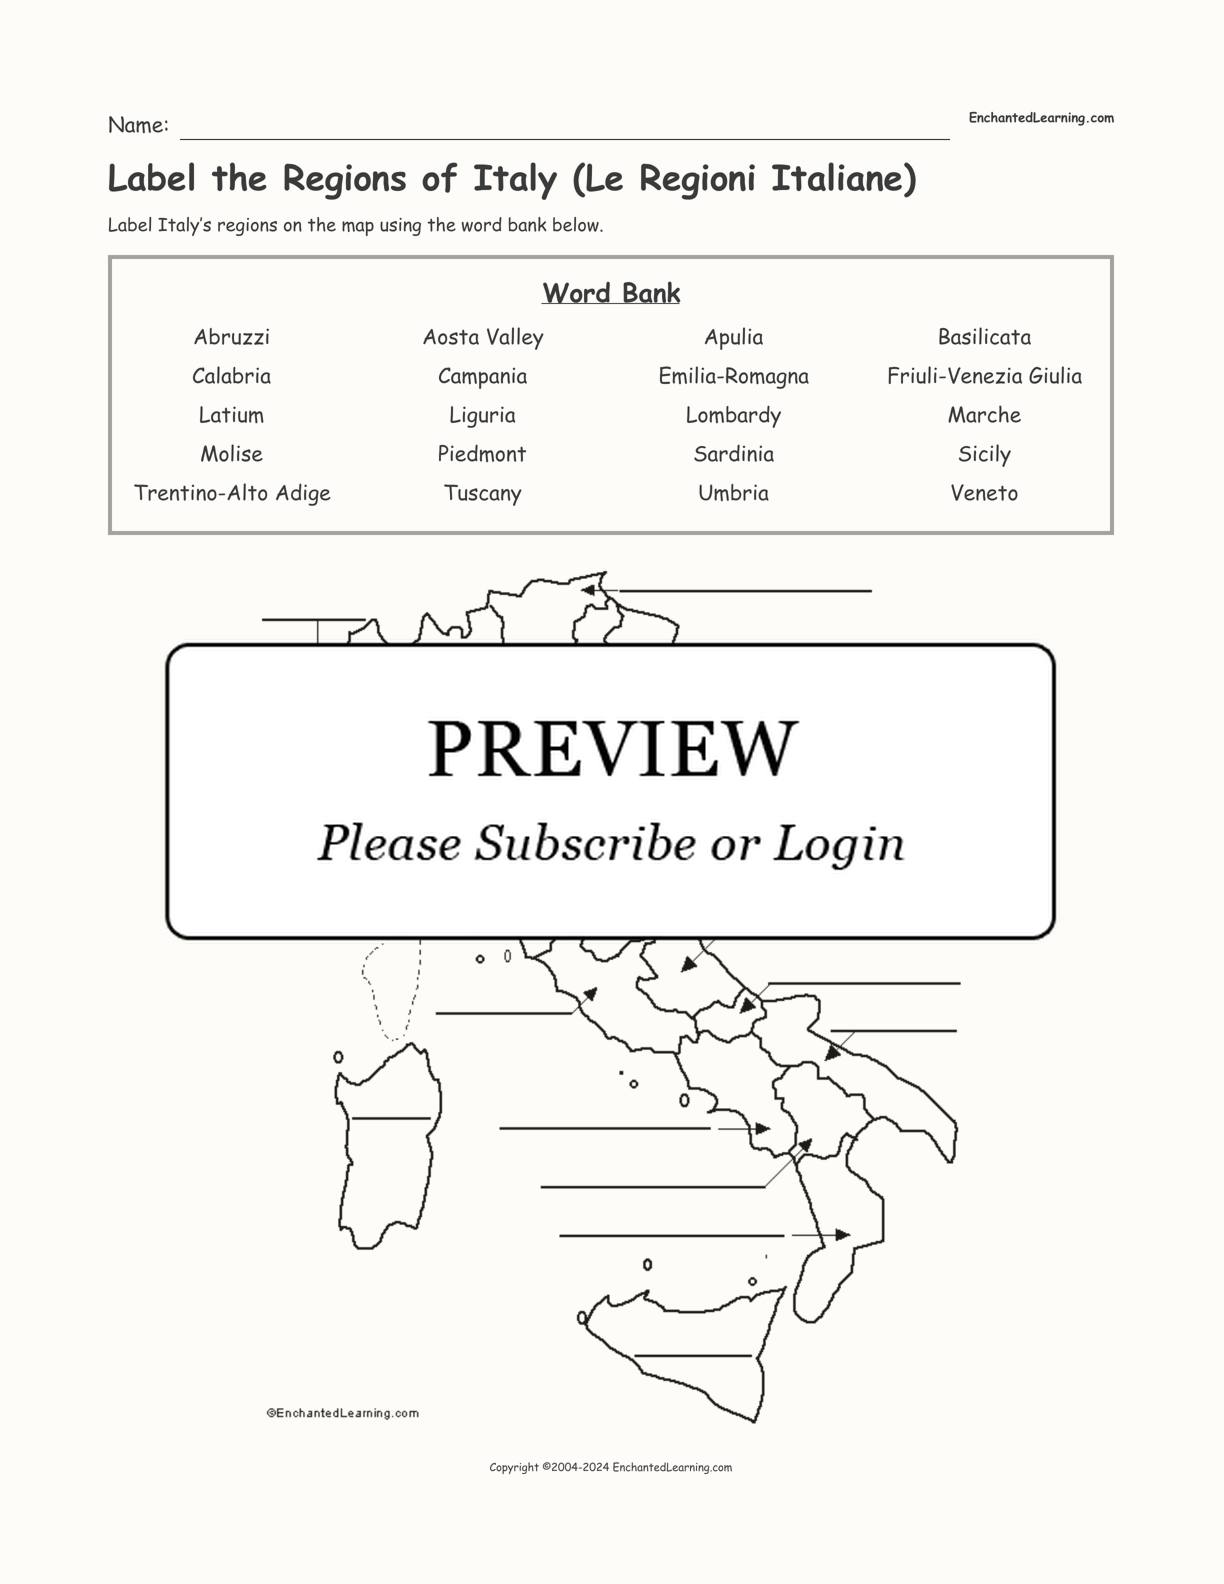 Label the Regions of Italy (Le Regioni Italiane) interactive worksheet page 1